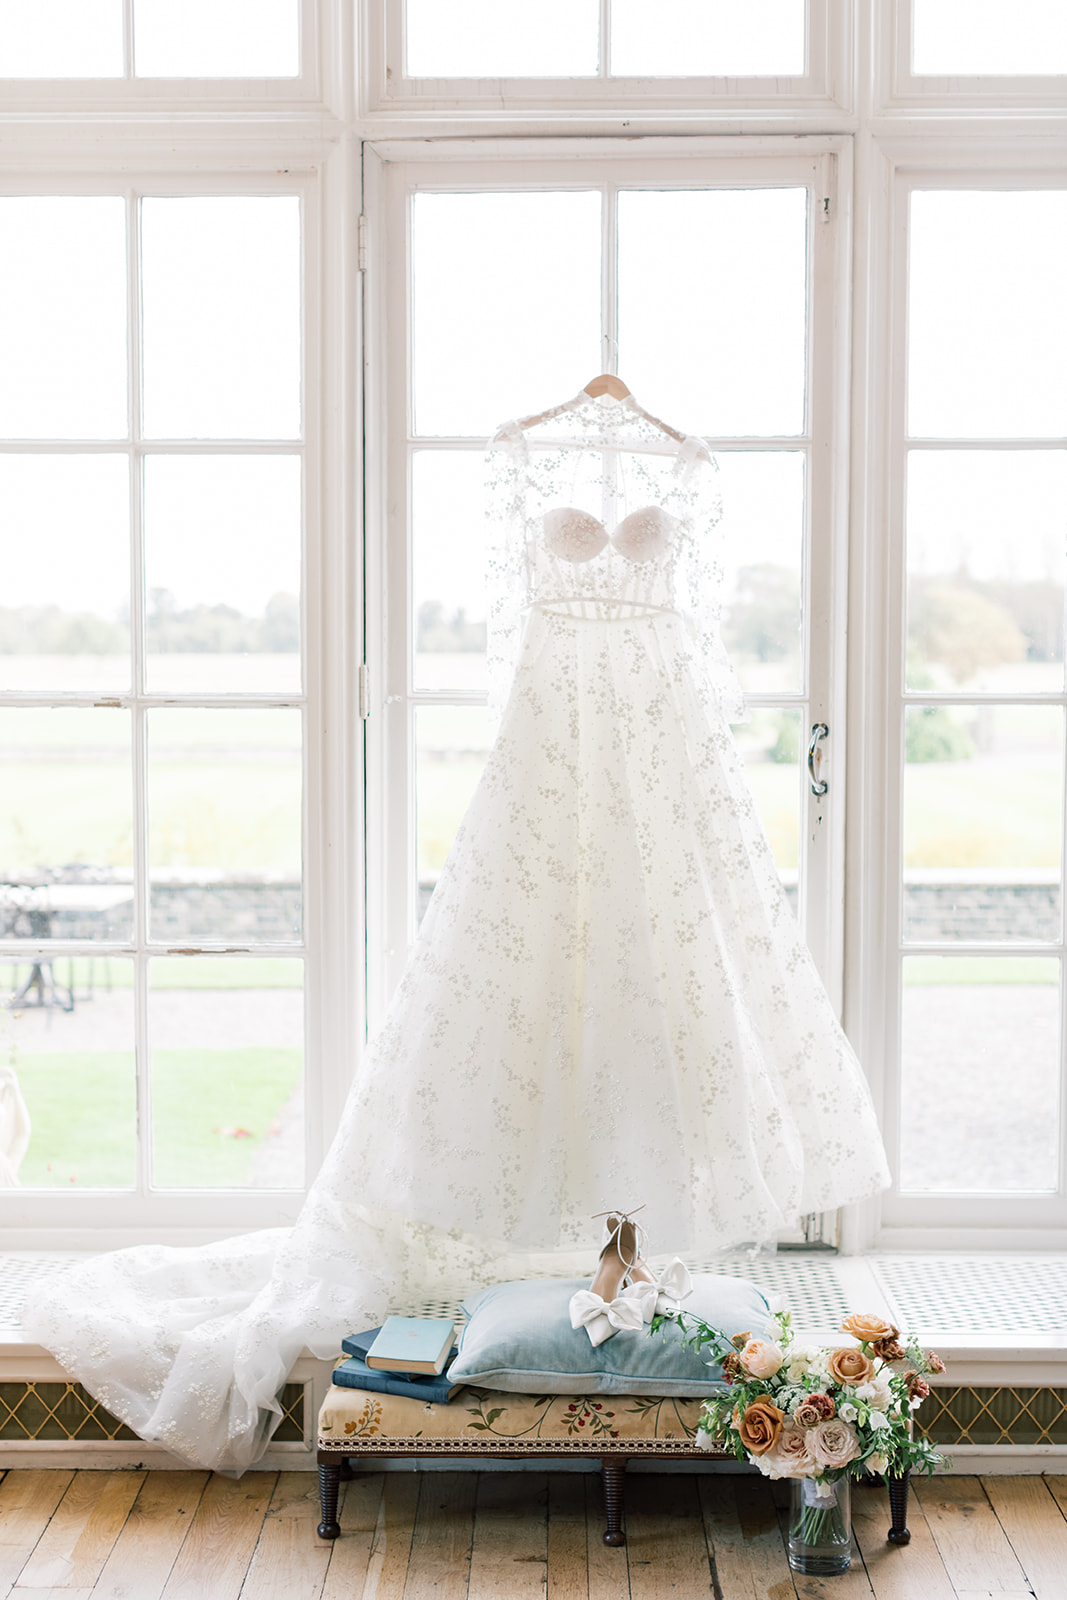 dress hanging in the window at luttrellstown castle wedding